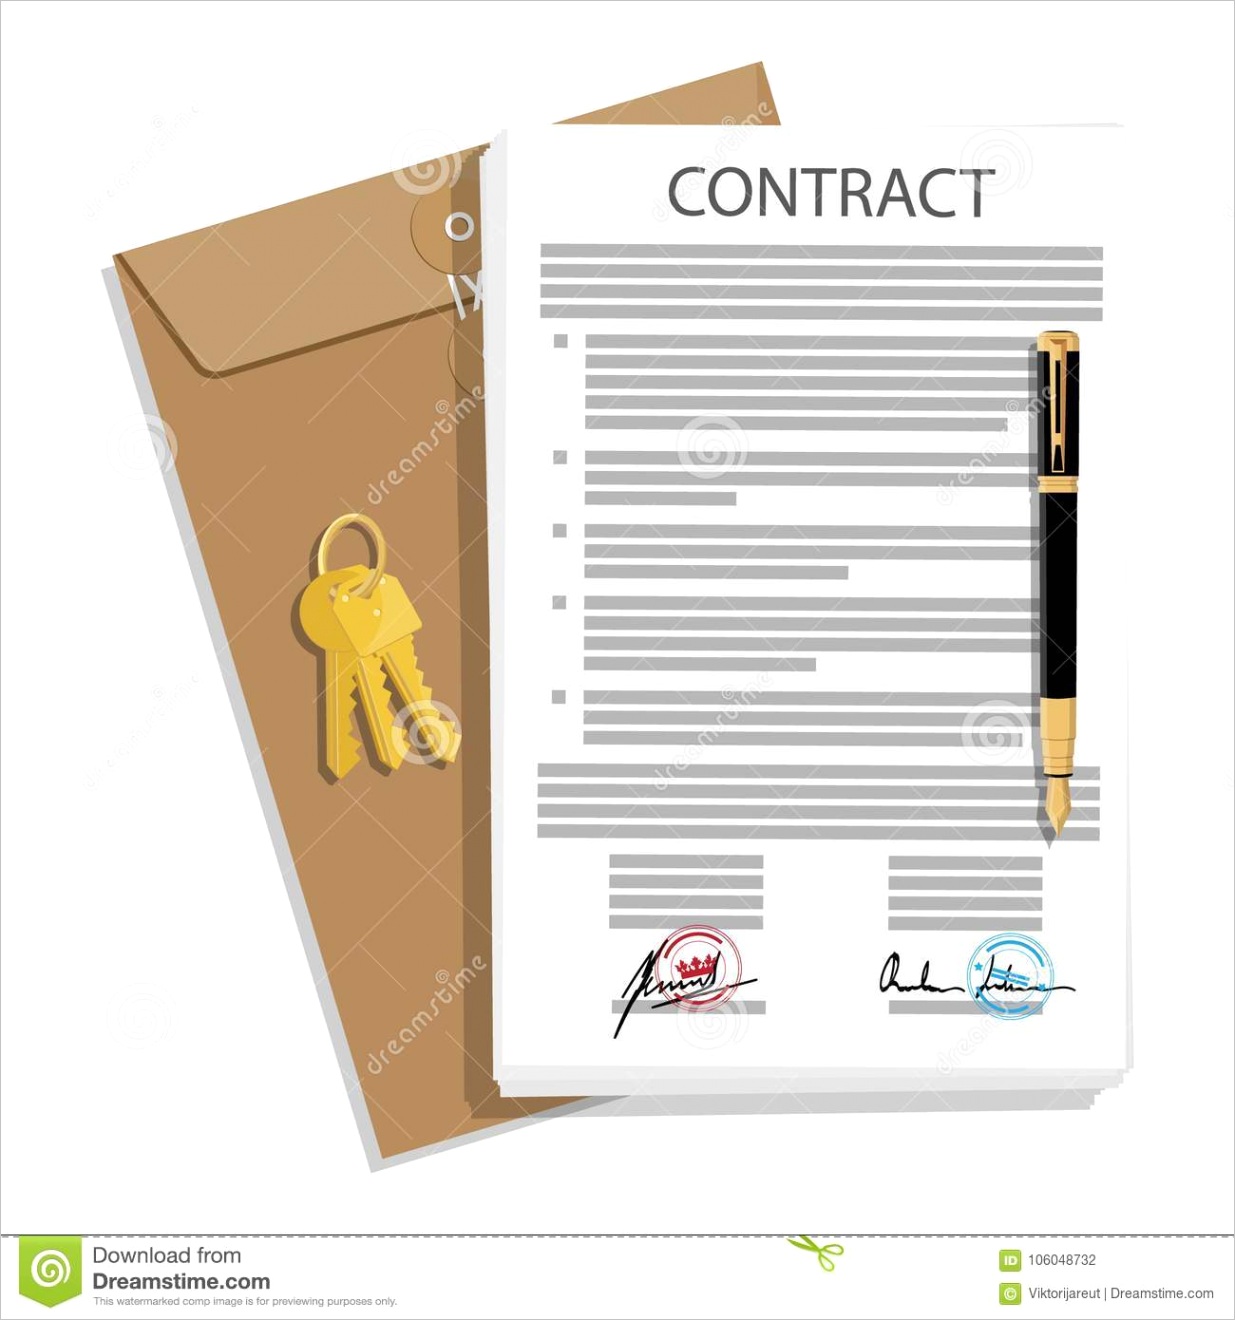 vector illustration signed business contract agreement brown envelope house key icon paper deal house sale loan contract image